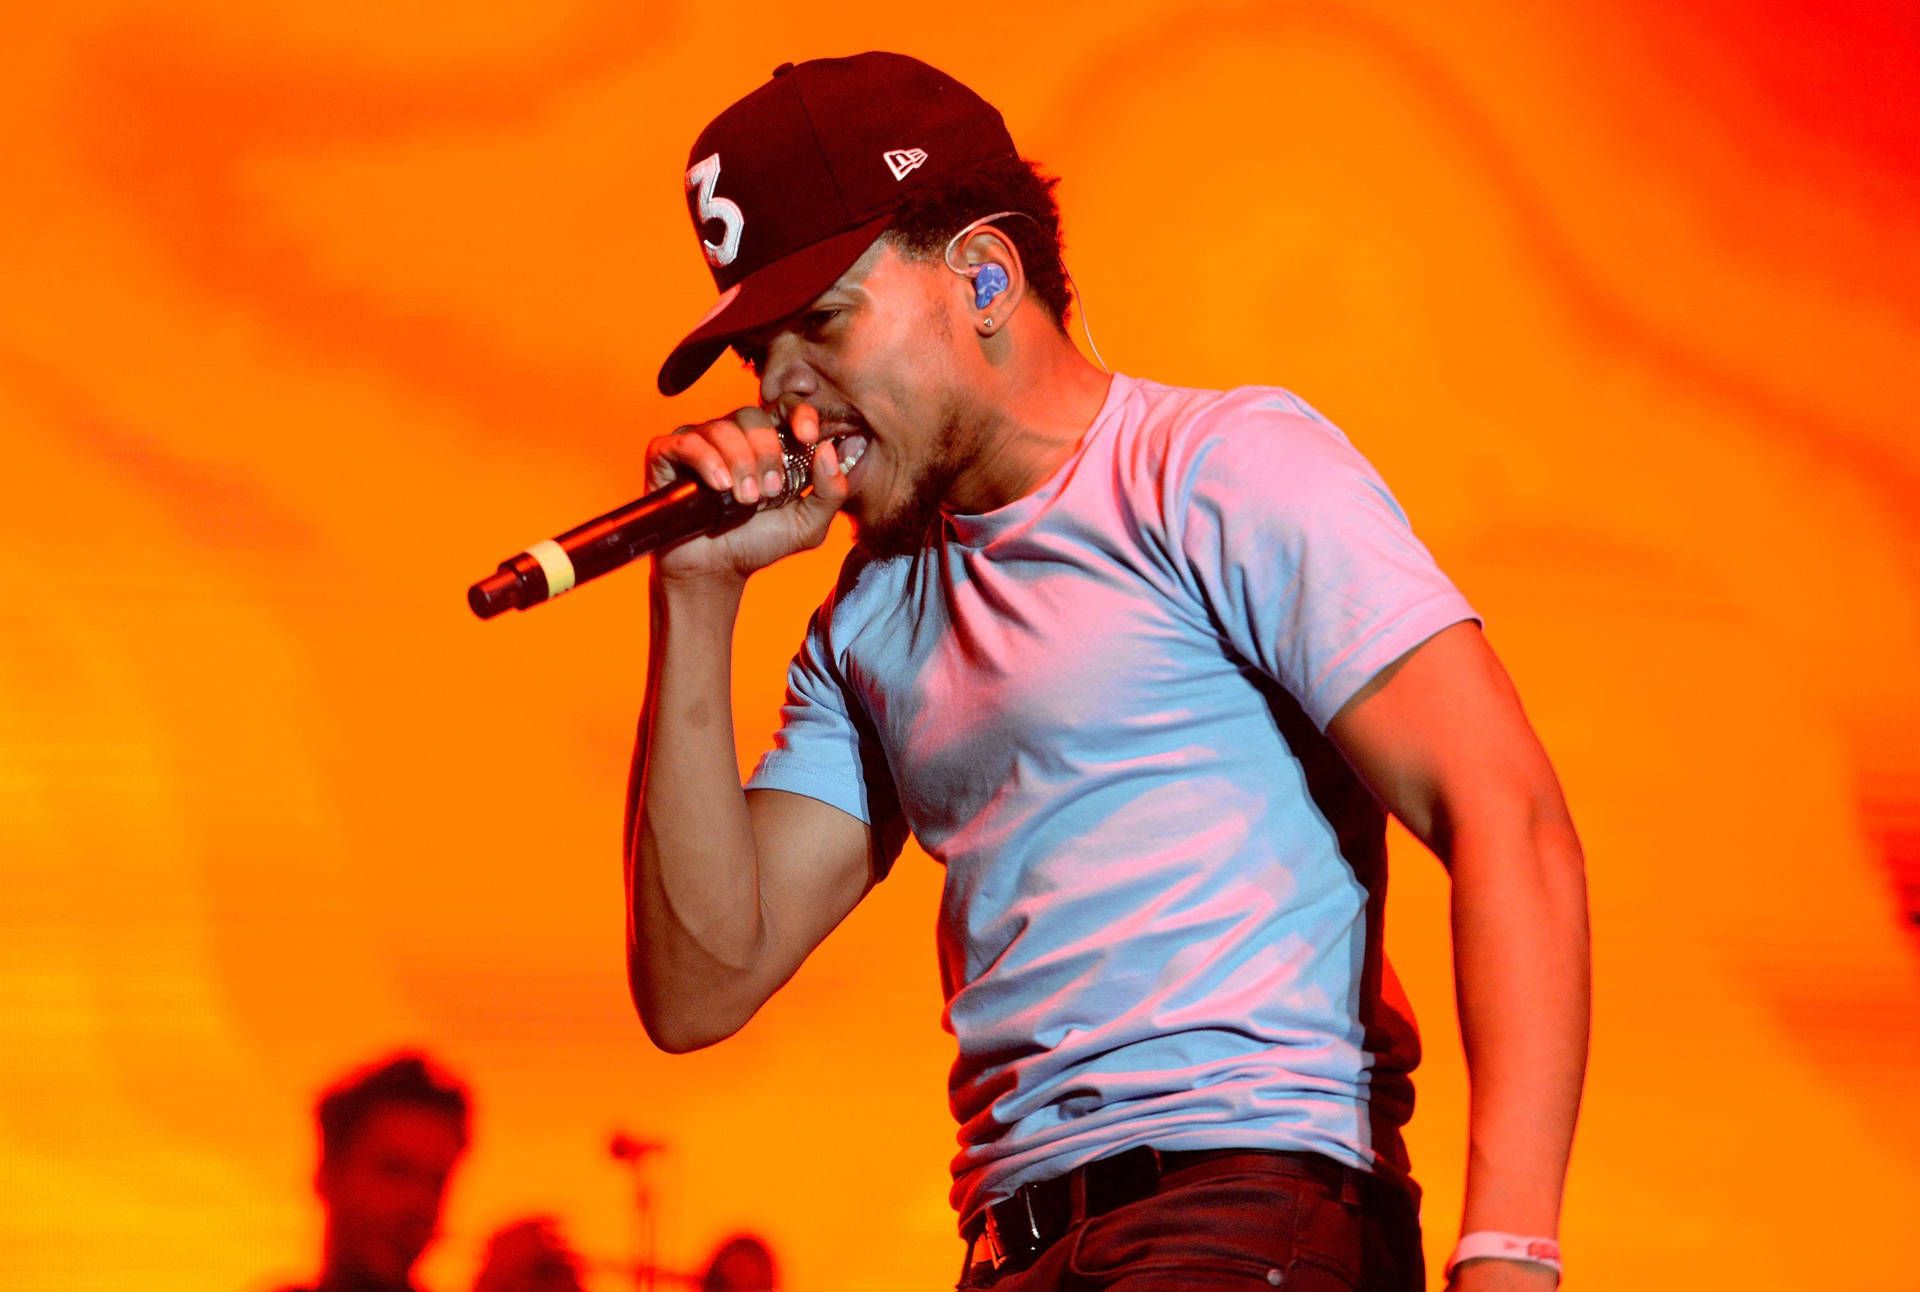 Chance the Rapper performs at the 2017 Pitchfork Music Festival in Chicago. - Chance the Rapper